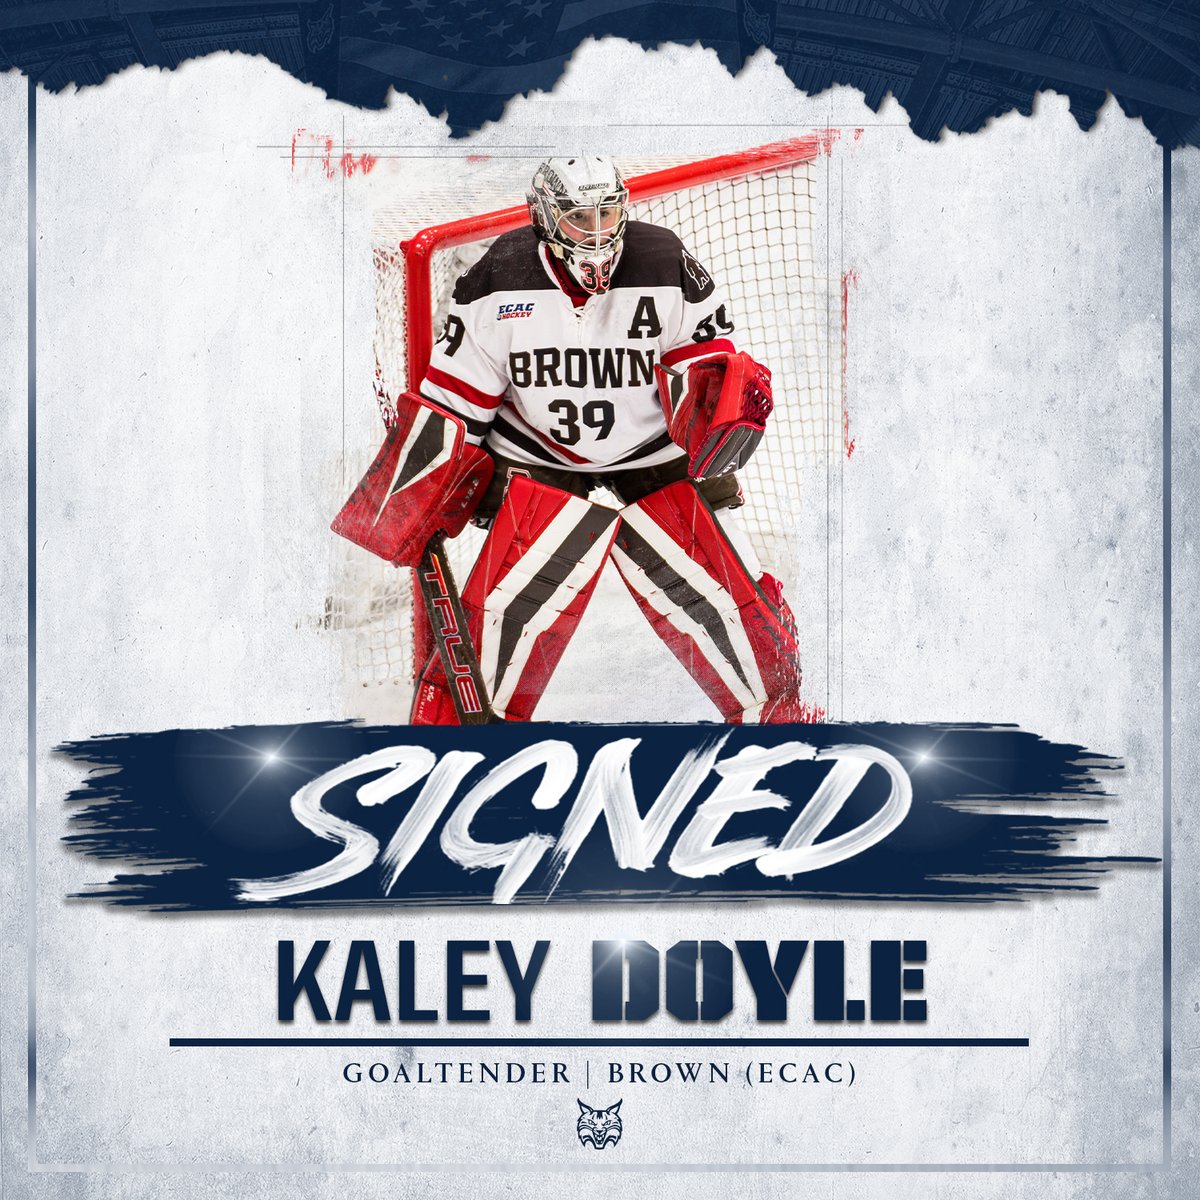 𝐒𝐈𝐆𝐍𝐄𝐃 - Kaley Doyle She comes to Hamden after three years at Brown, earning 2021-22 All-ECAC Second Team honors as well as a finalist for the ECAC Rookie of the Year! #BobcatNation x #NCAAHockey